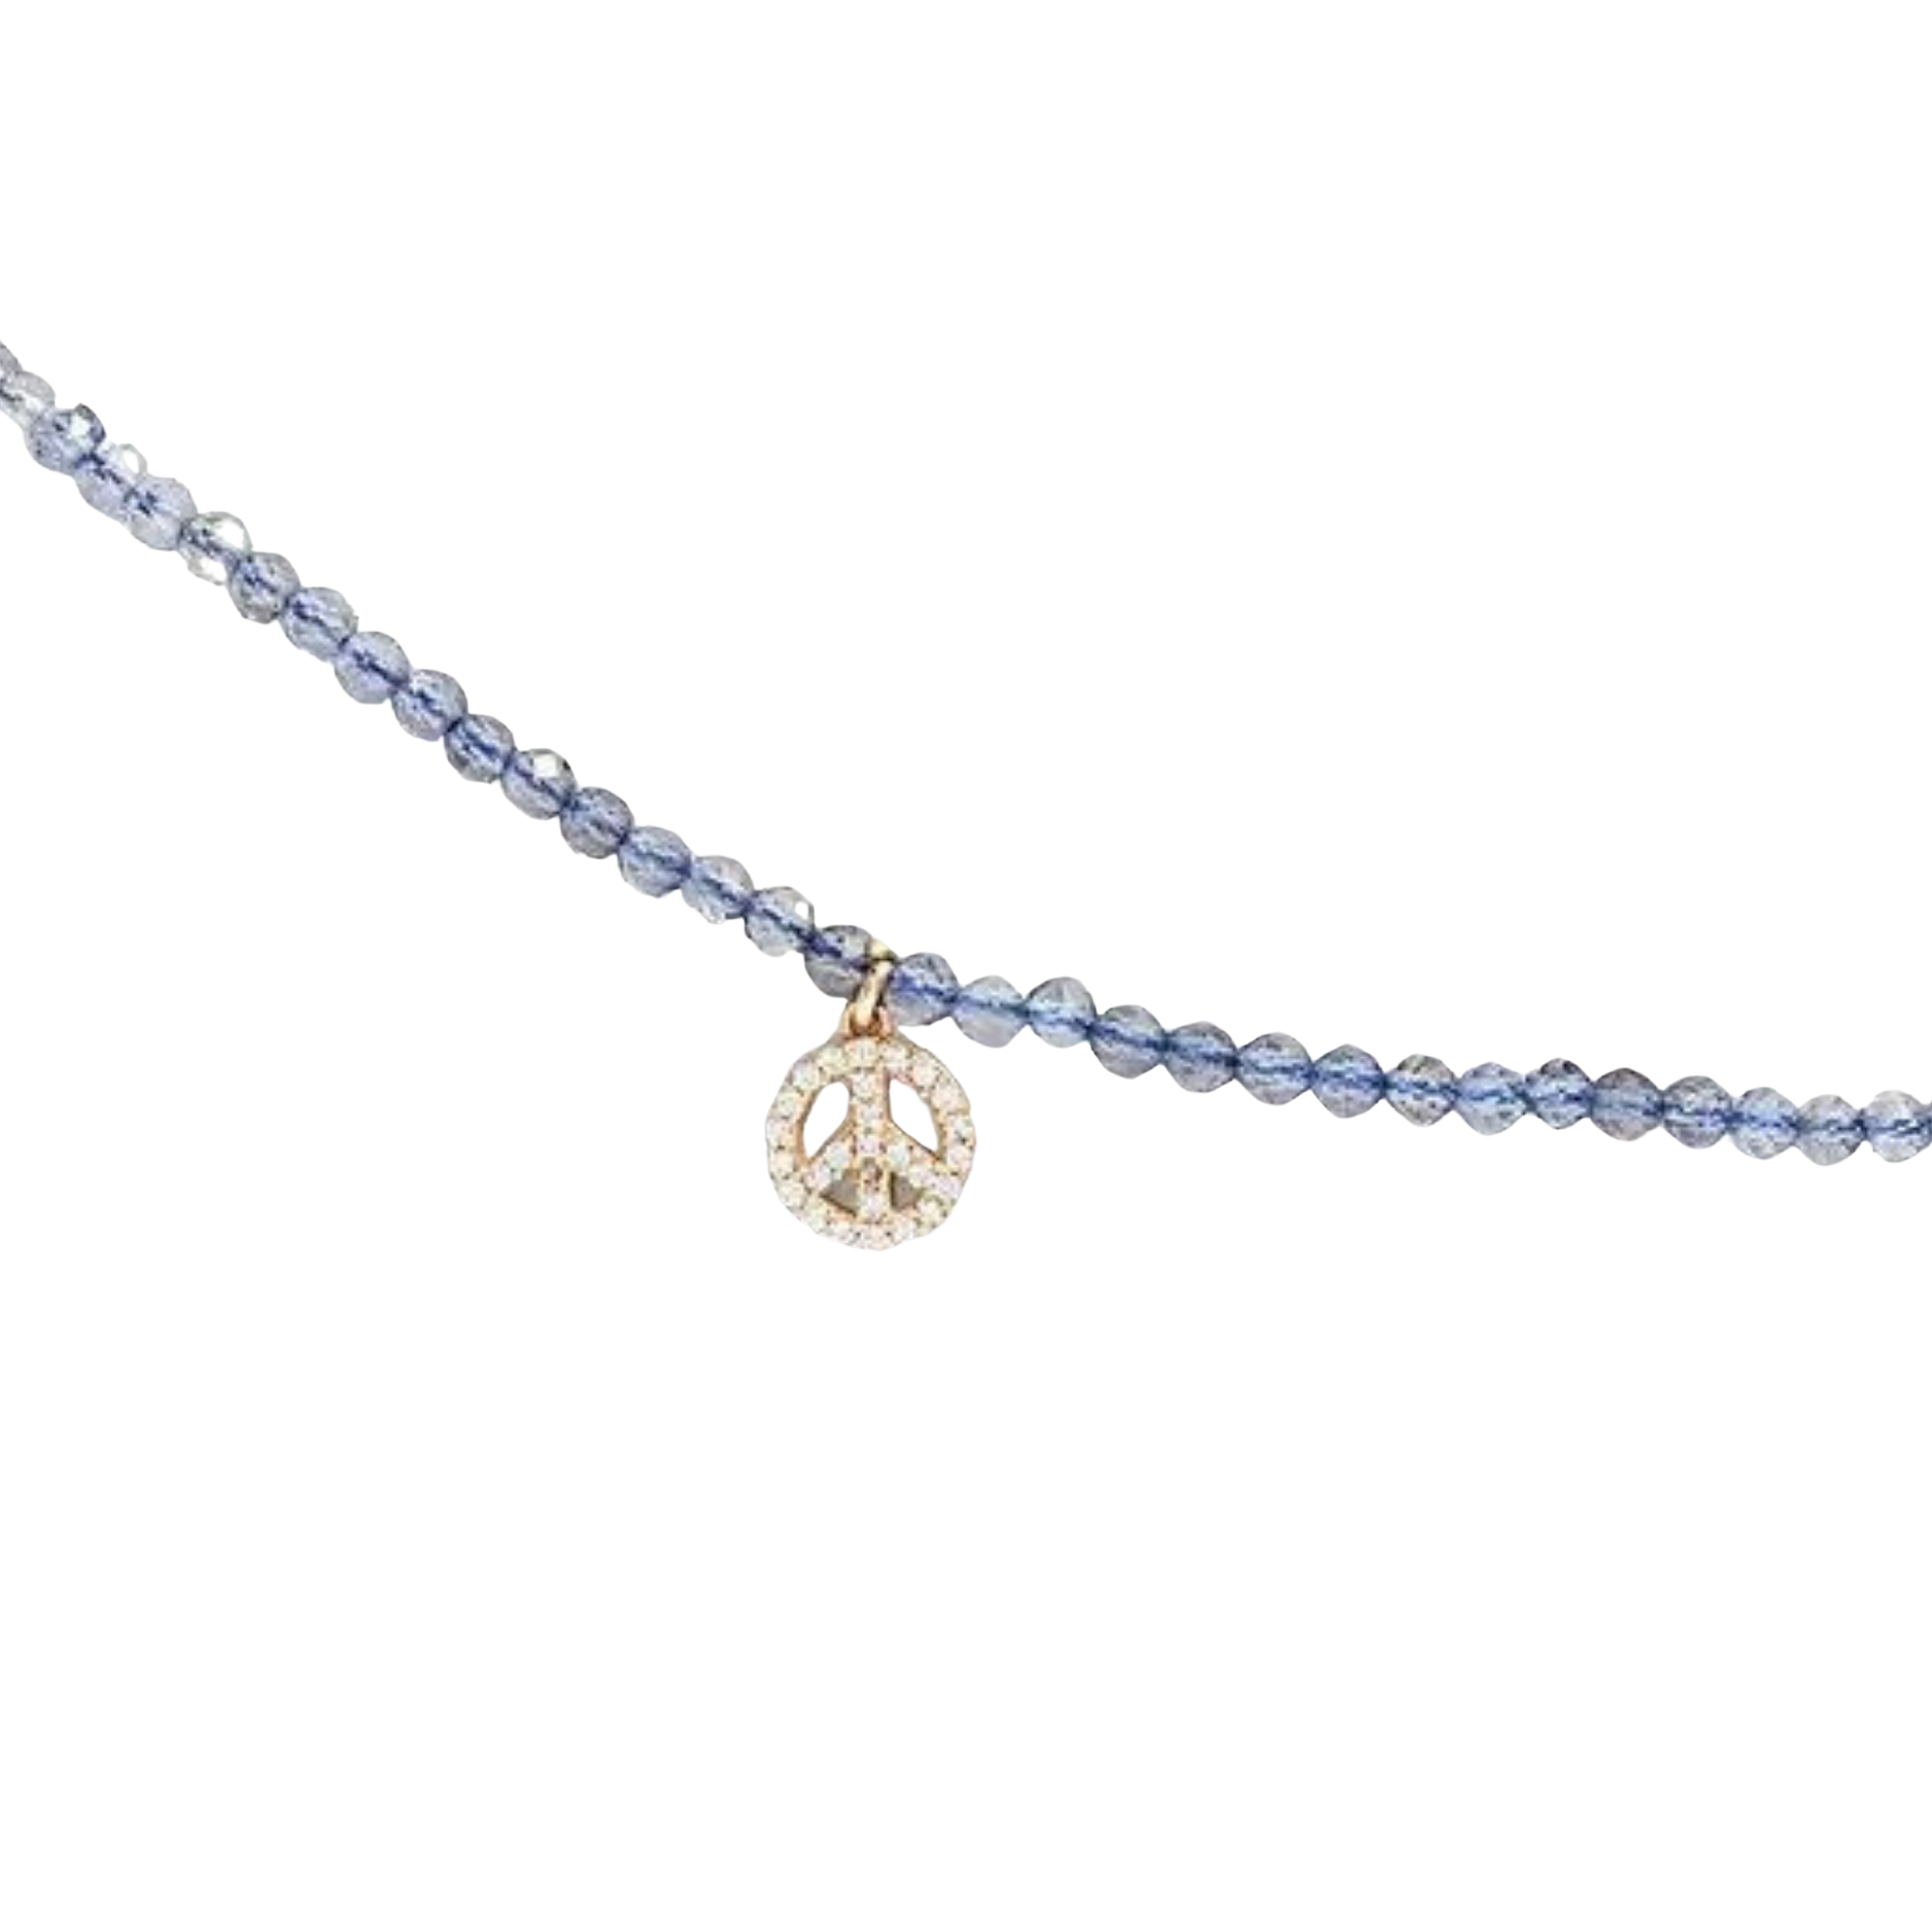 Argento Vivo Sterling Silver Peace Sign Beaded Anklet, $78